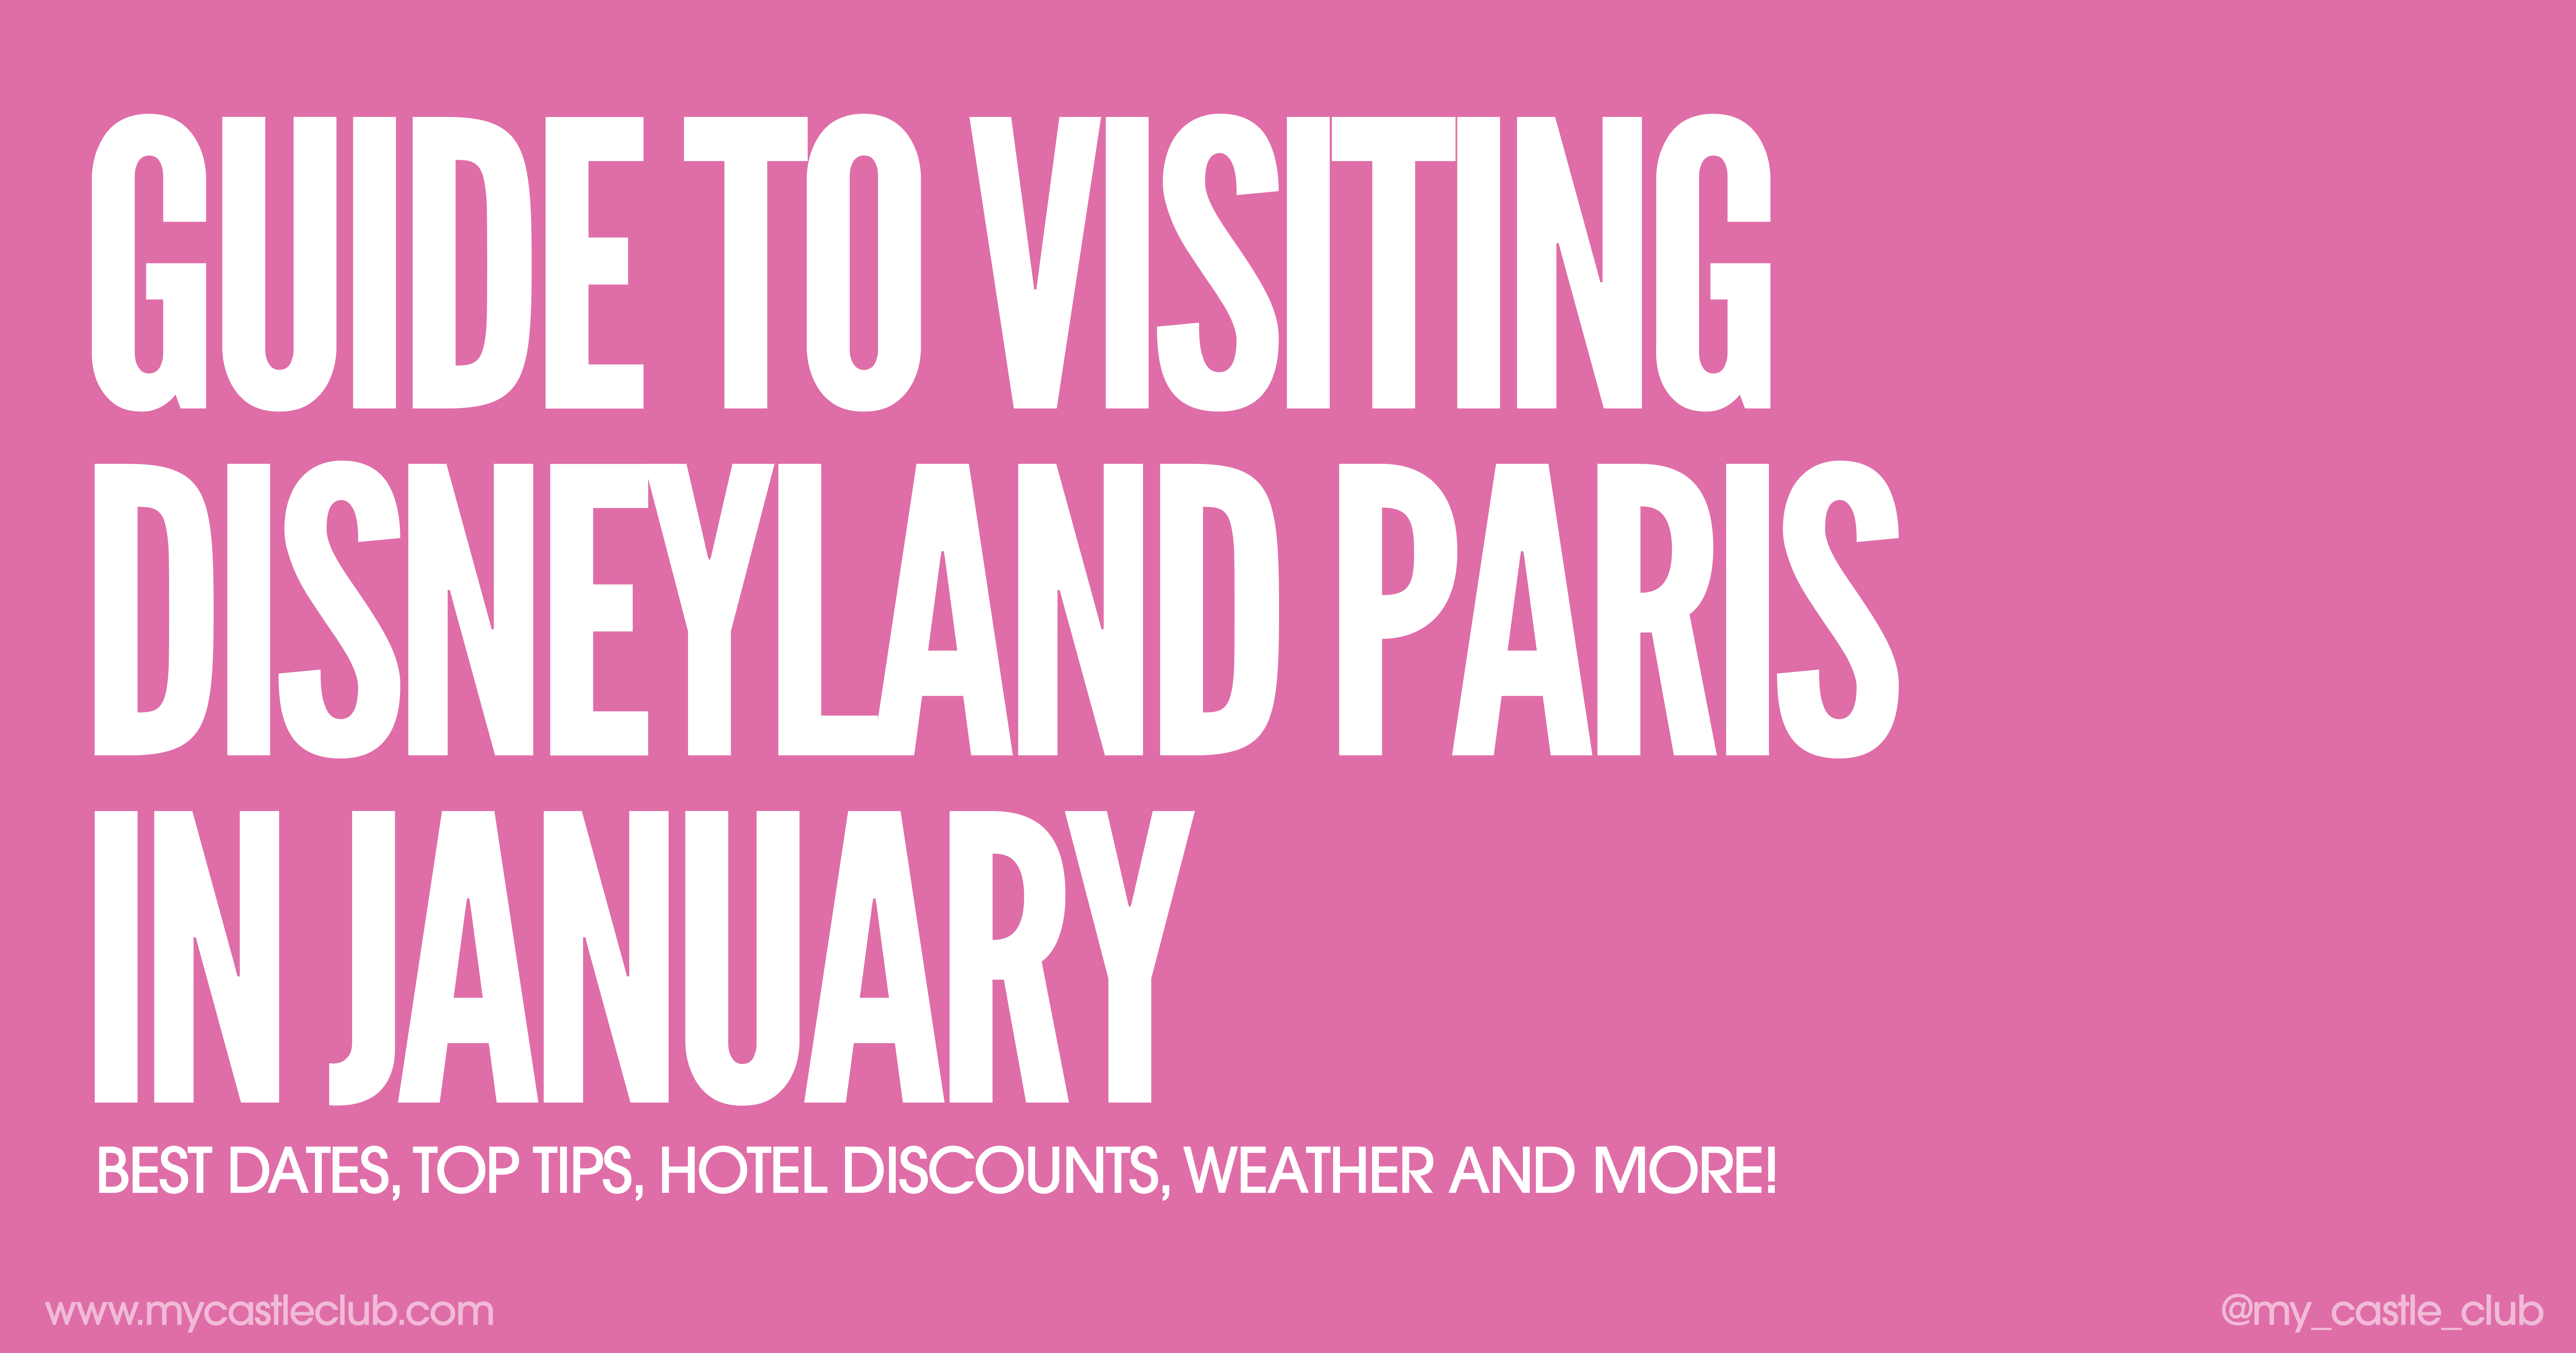 Visiting Disneyland Paris in January, Best Dates, Top Tips, Hotel Discounts, Weather and more!